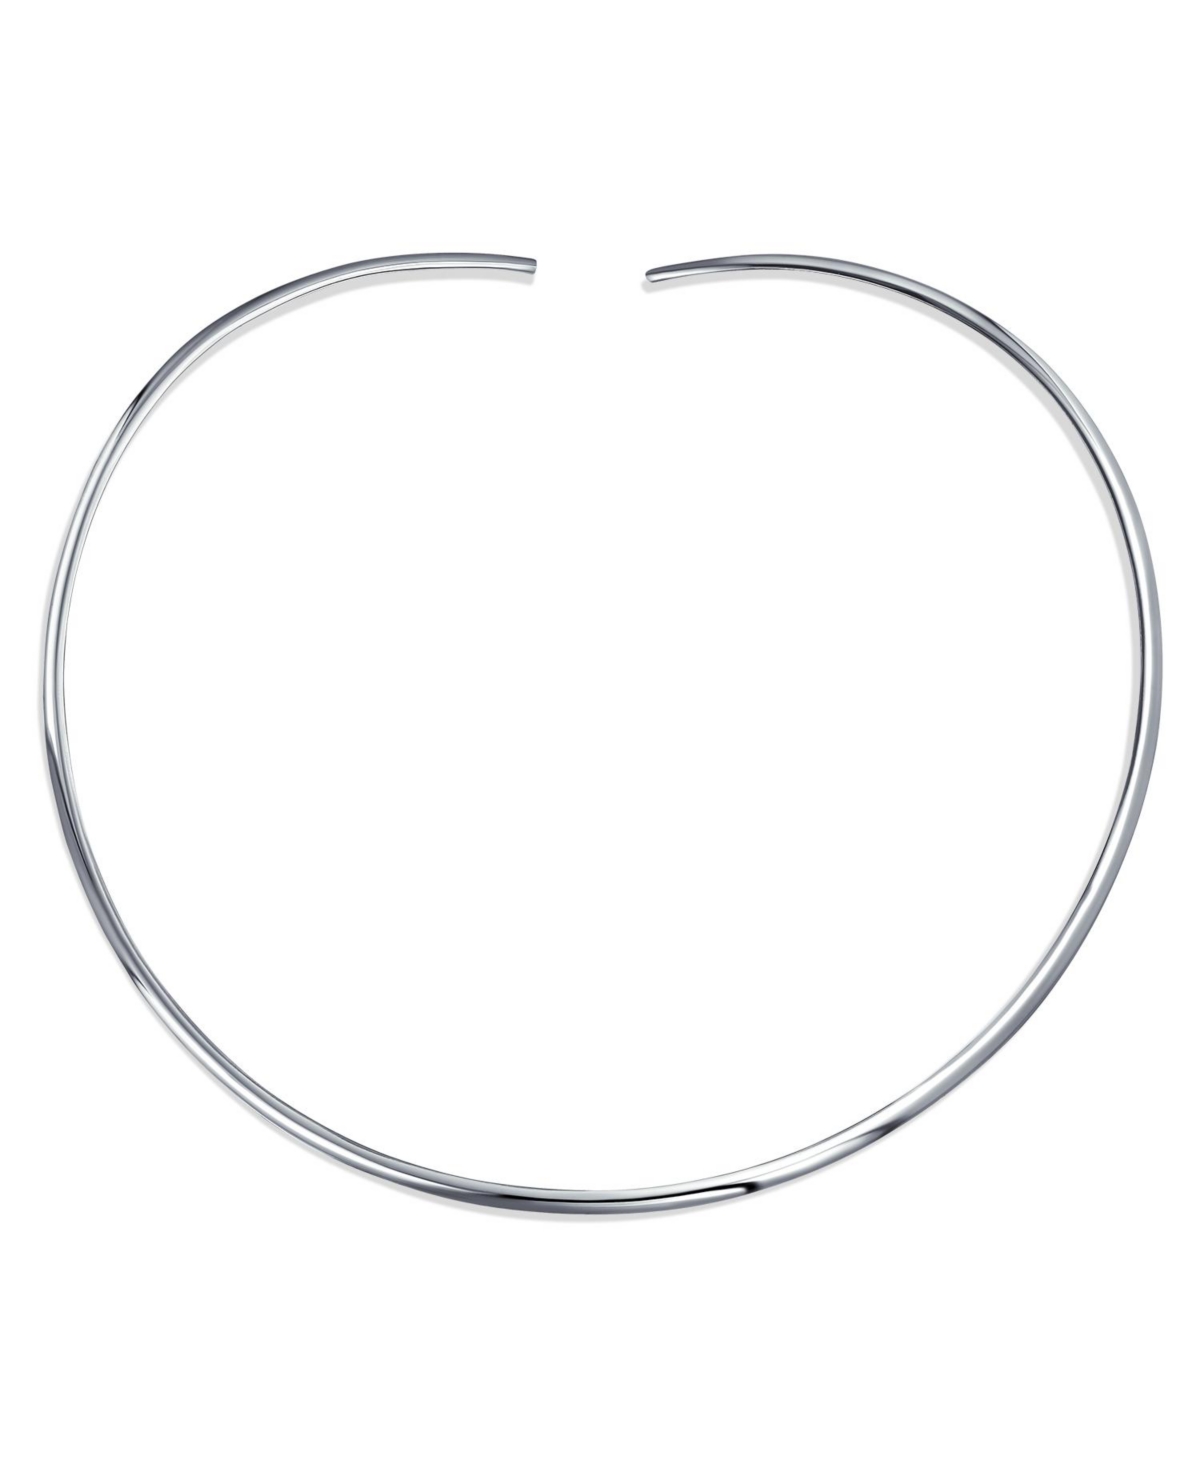 Classic Simple Plain Flat Slider Contoured Collar Curved Choker Necklace For Women Polished.925 Silver Sterling 2MM - Silver